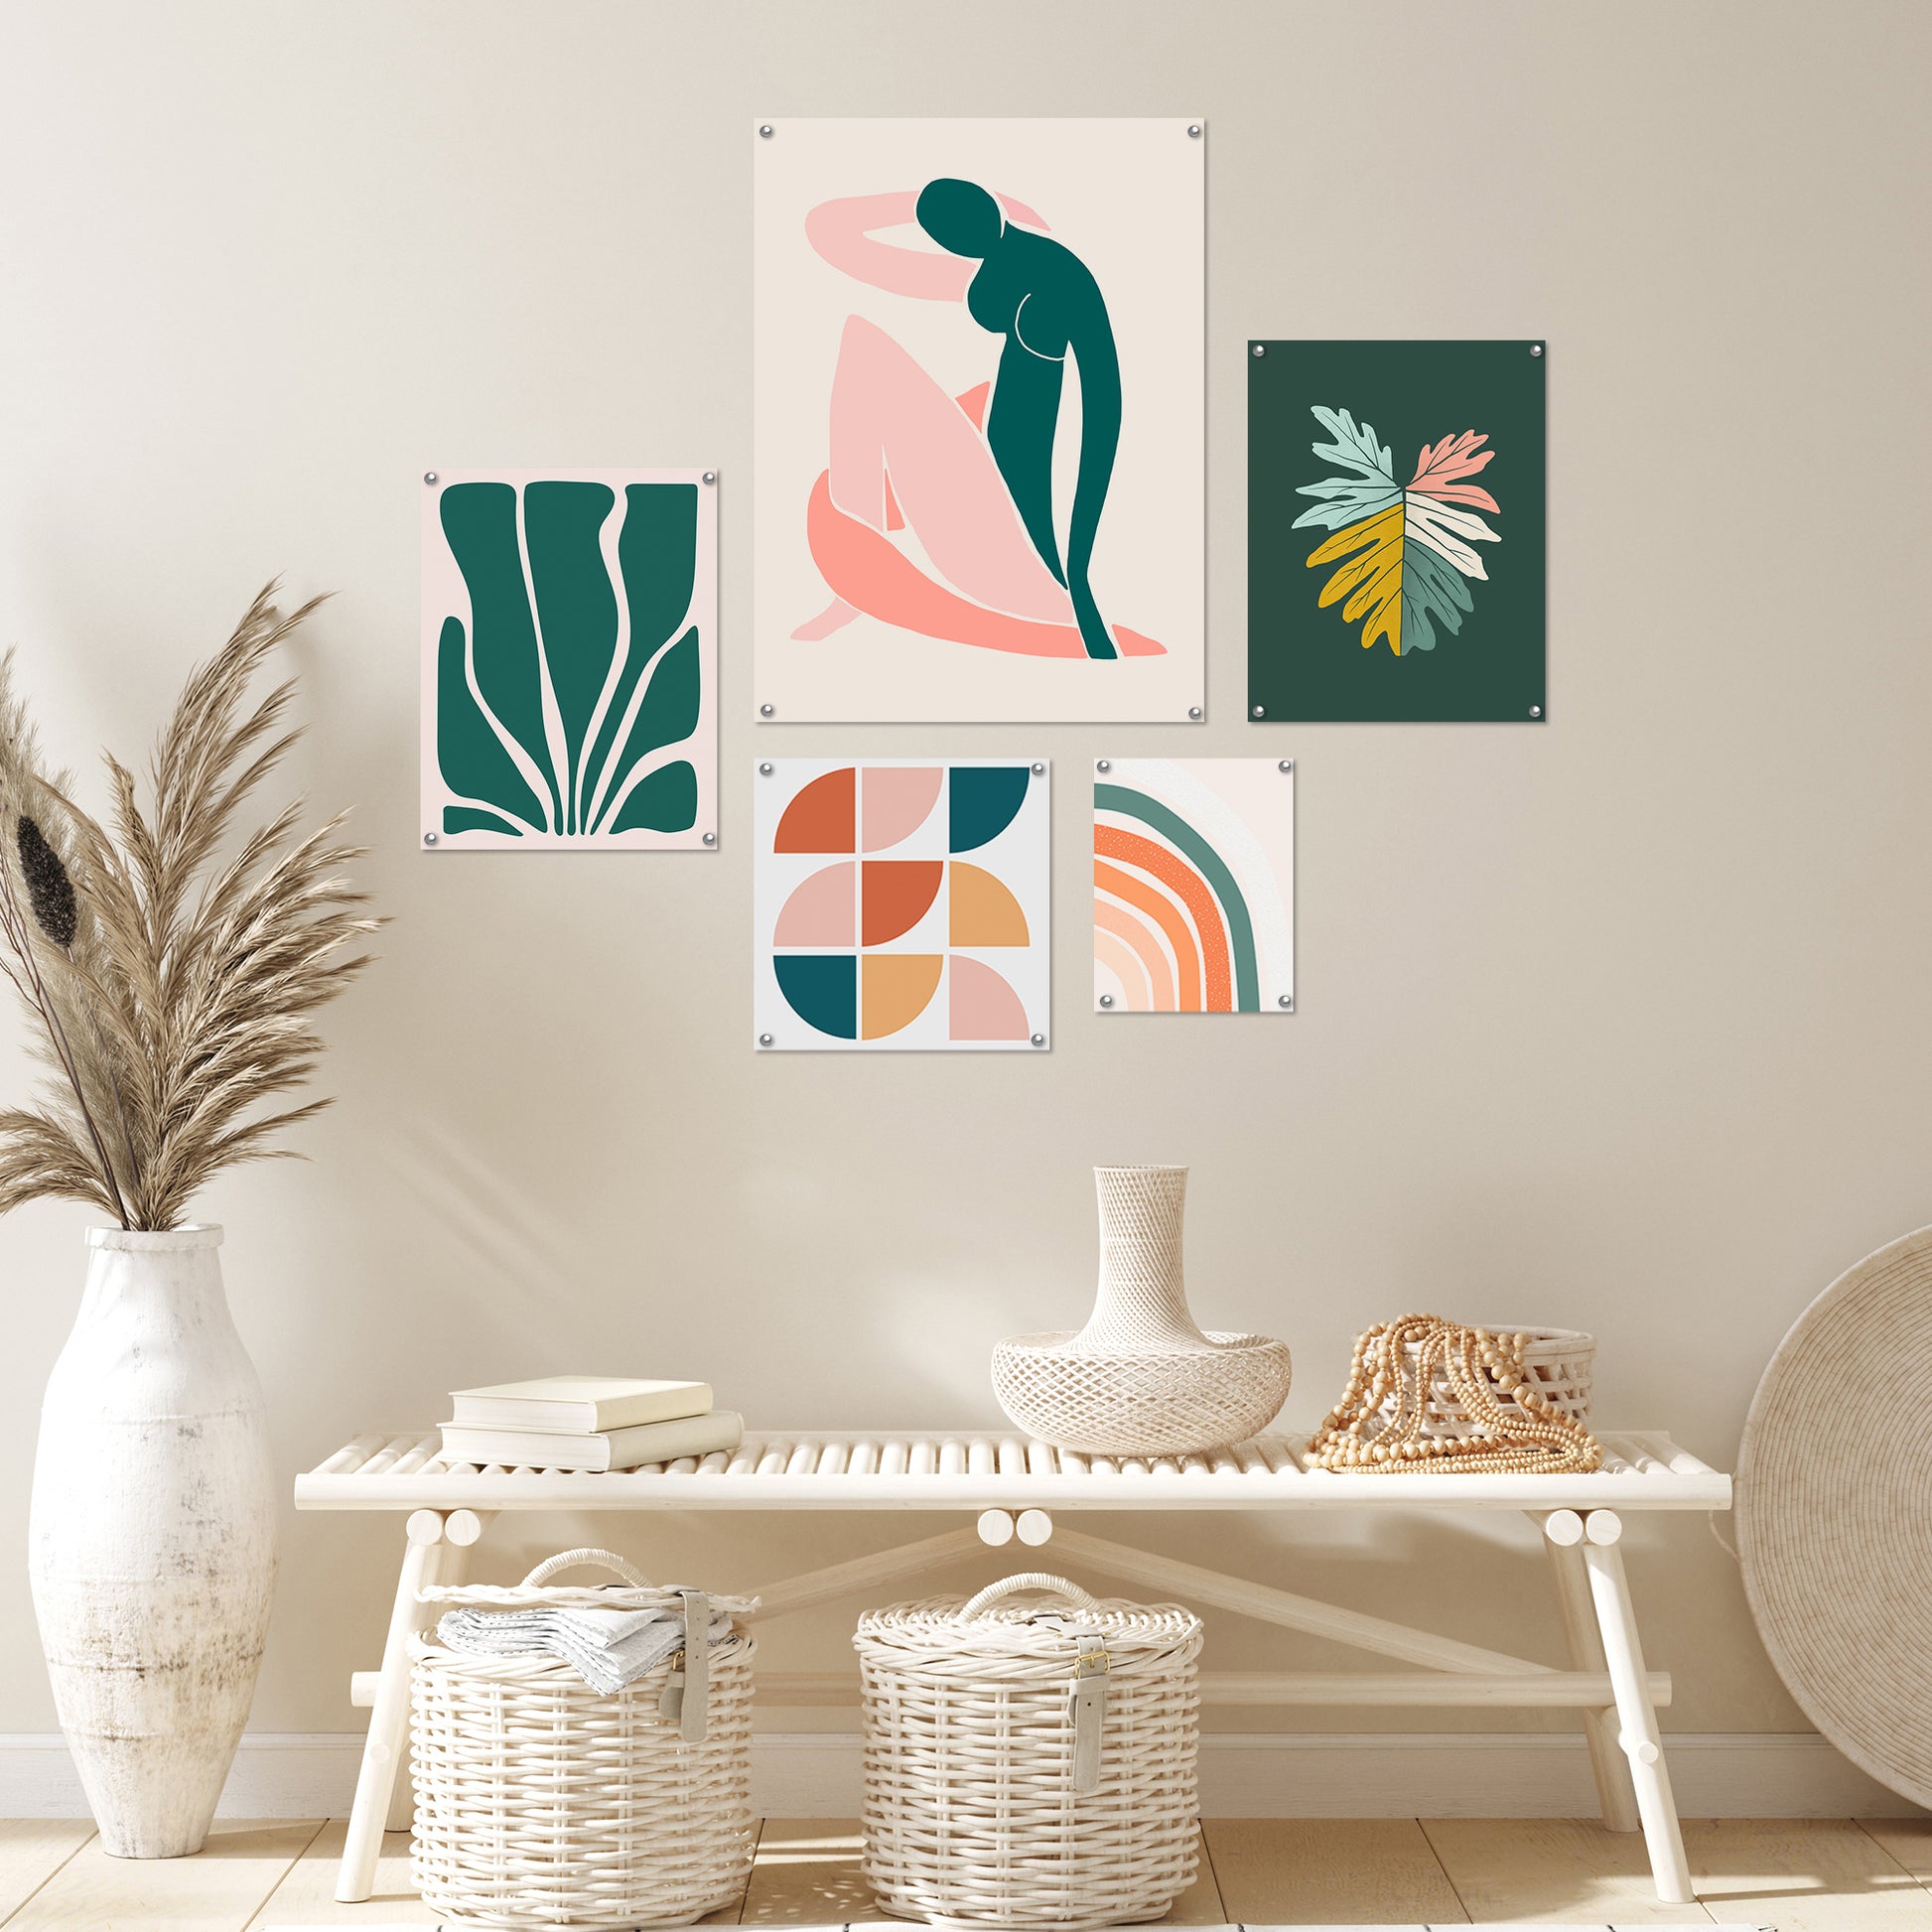 5 Piece Poster Gallery Wall Art Set - Pink & Green Abstract Woman Shap –  Americanflat